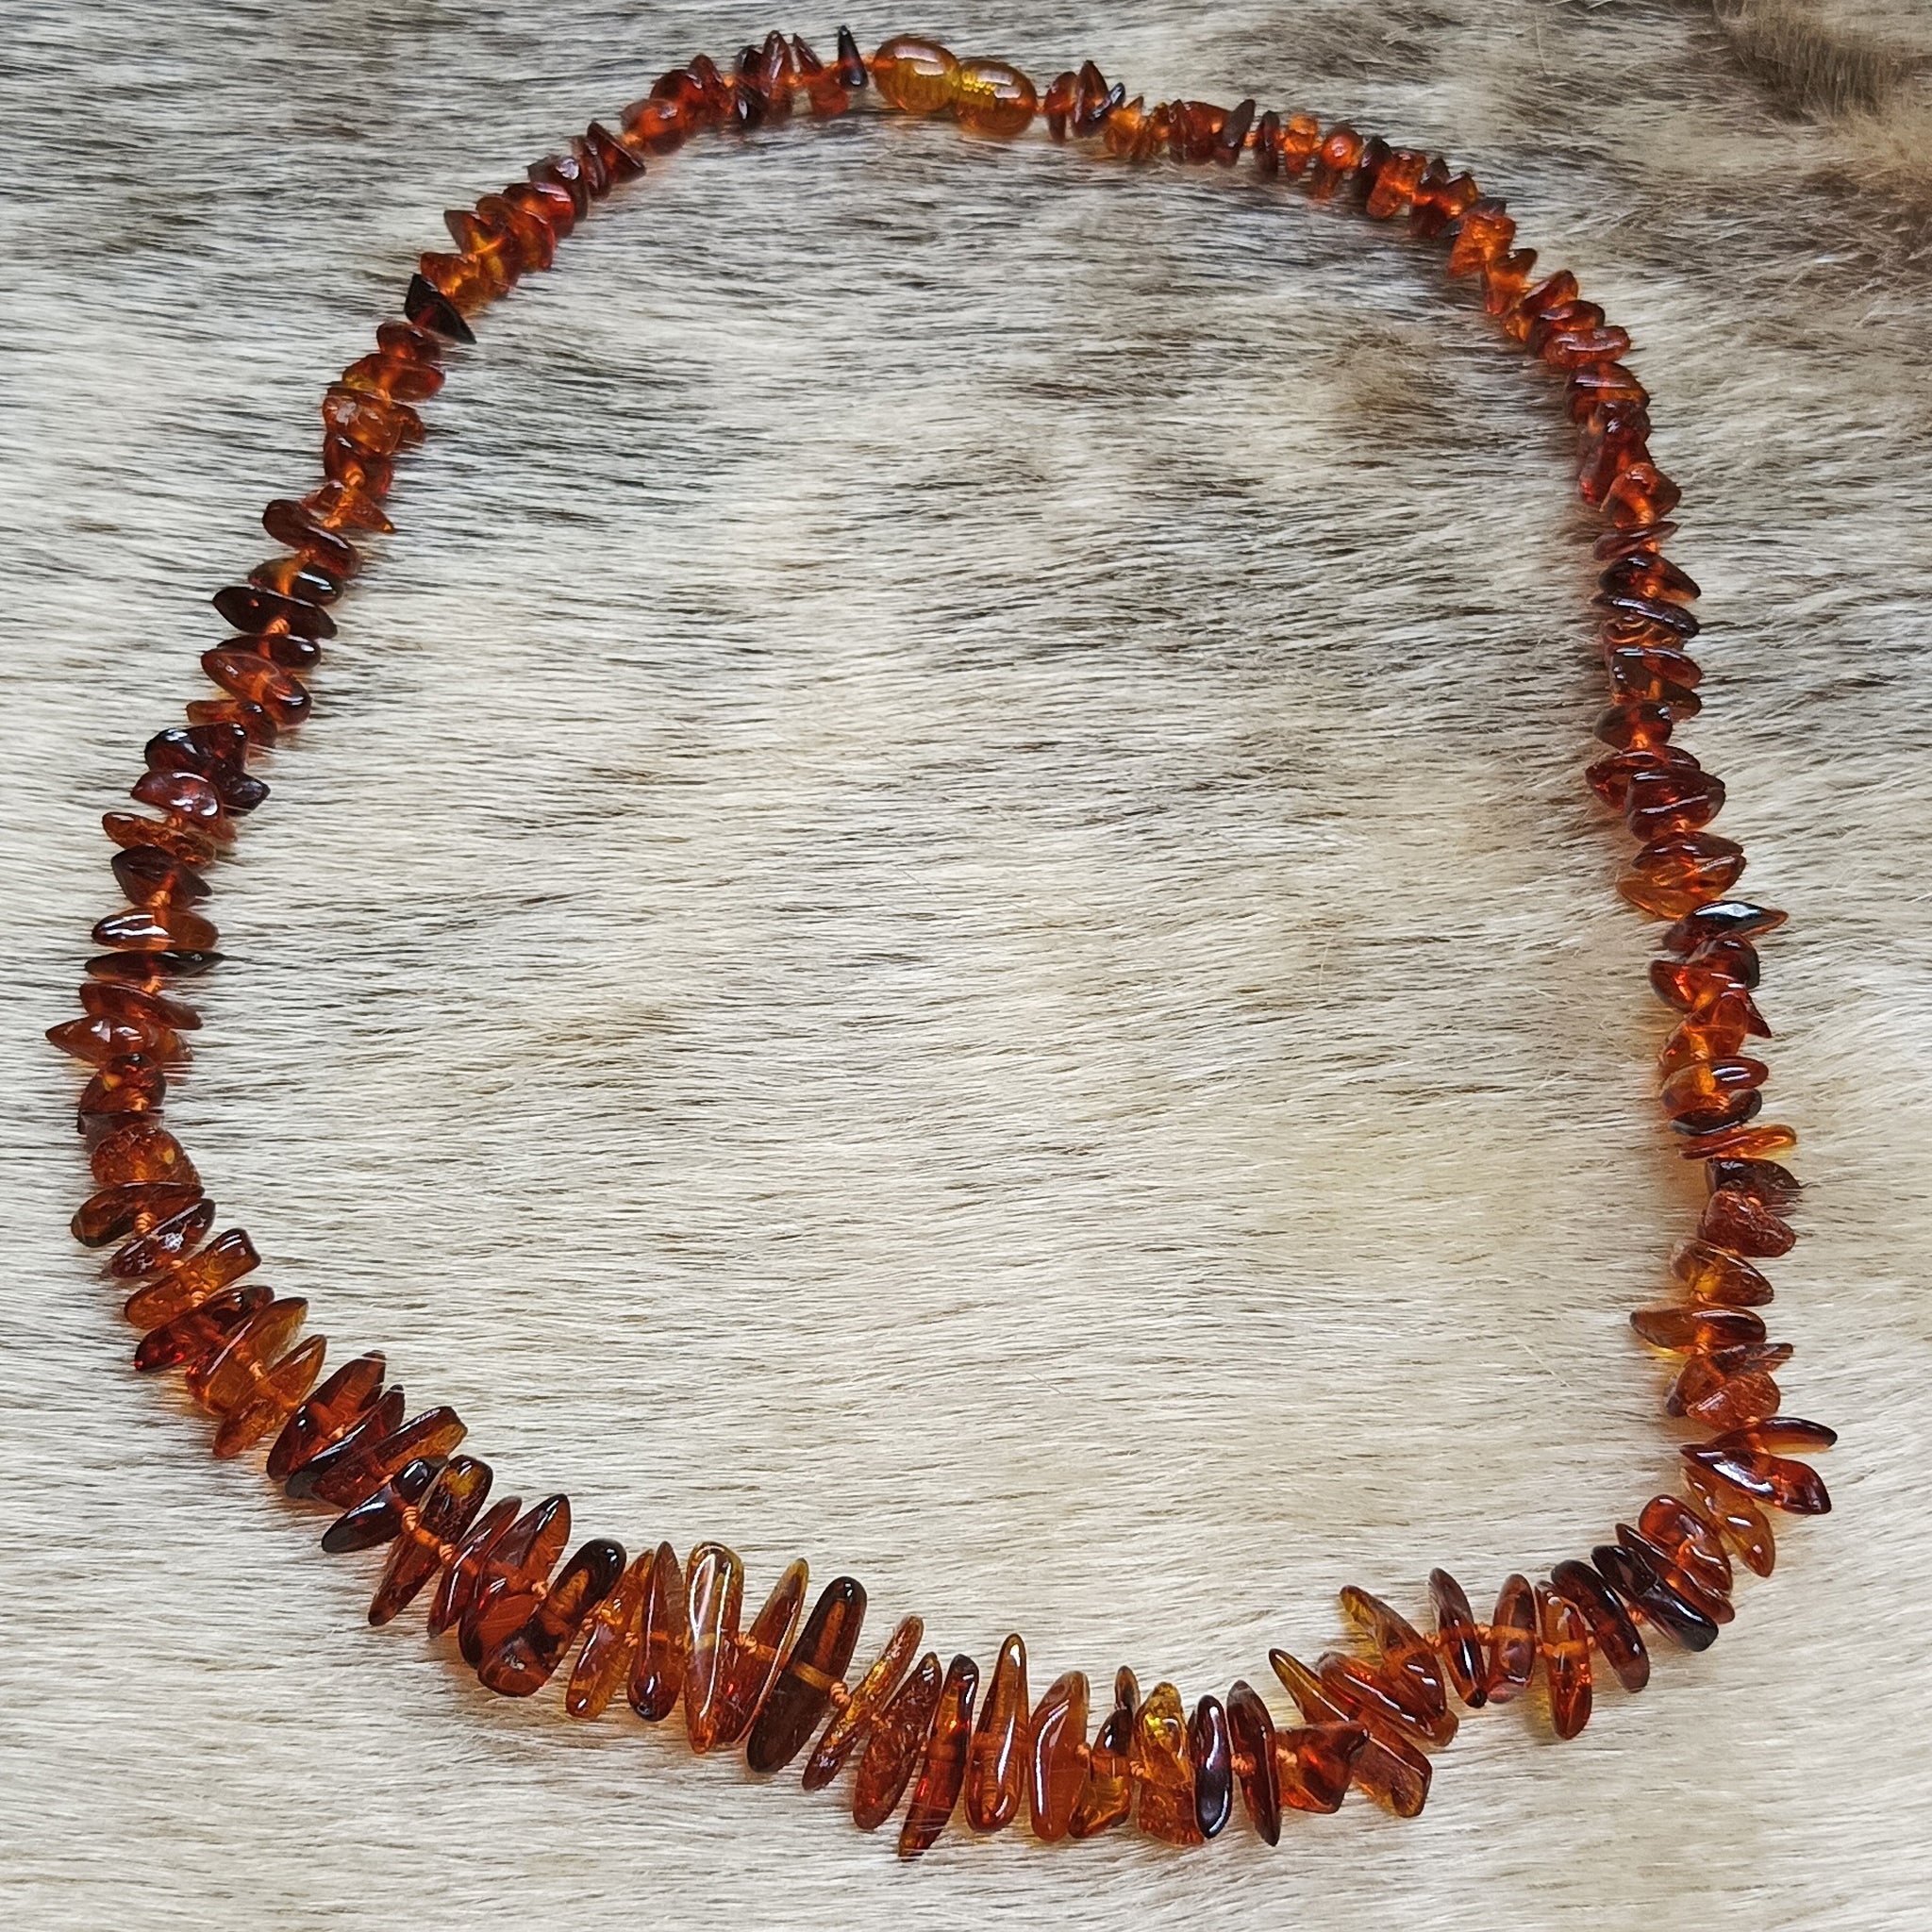 Amber Viking Necklace, Made From Cut and Polished Dark Amber Chips - on Fur